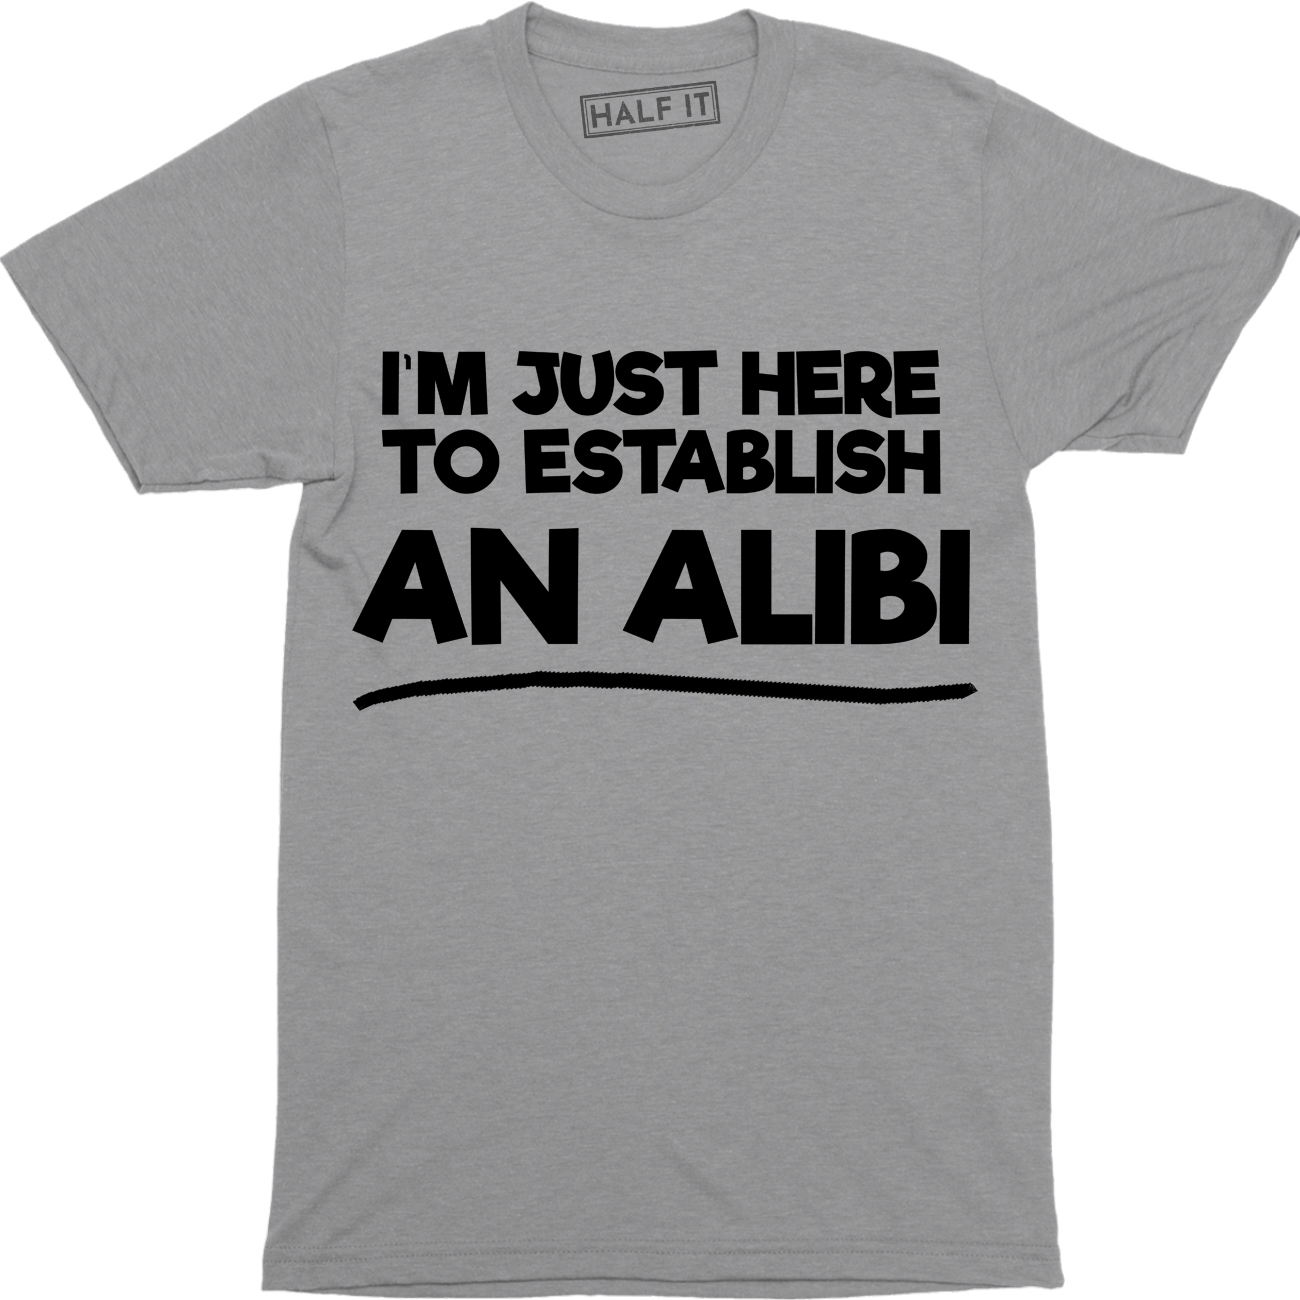 I'm Just Here To Establish An Alibi Funny Husband Party Men's Gift T-Shirt - image 1 of 4